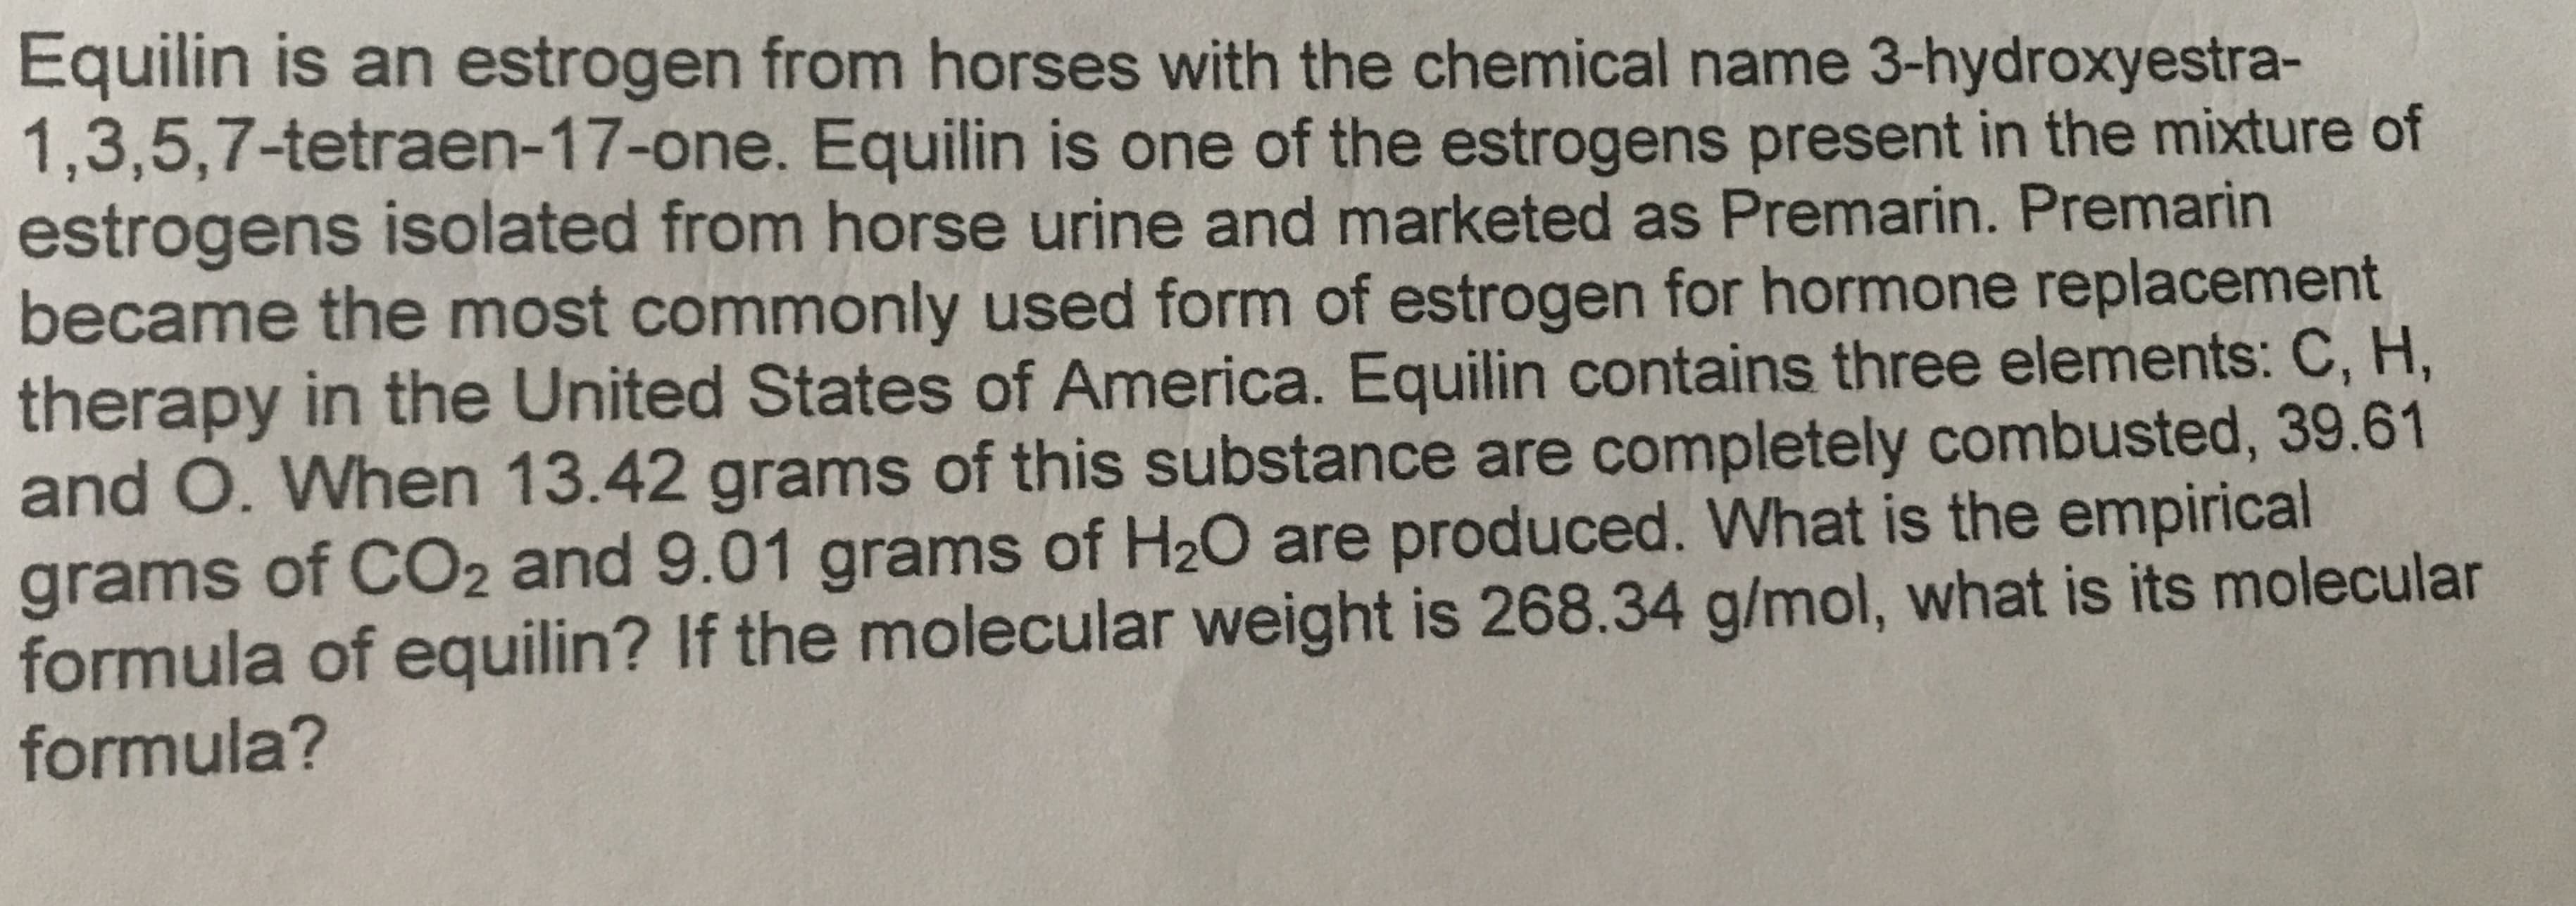 Equilin is an estrogen from horses with the chemical name 3-hydroxyestra-
1,3,5,7-tetraen-17-one. Equilin is one of the estrogens present in the mixture of
estrogens isolated from horse urine and marketed as Premarin. Premarin
became the most commonly used form of estrogen for hormone replacement
therapy in the United States of America. Equilin contains three elements: C, H,
and O. When 13.42 grams of this substance are completely combusted, 39.61
grams of CO2 and 9.01 grams of H20 are produced. What is the empirical
formula of equilin? If the molecular weight is 268.34 g/mol, what is its molecular
formula?
